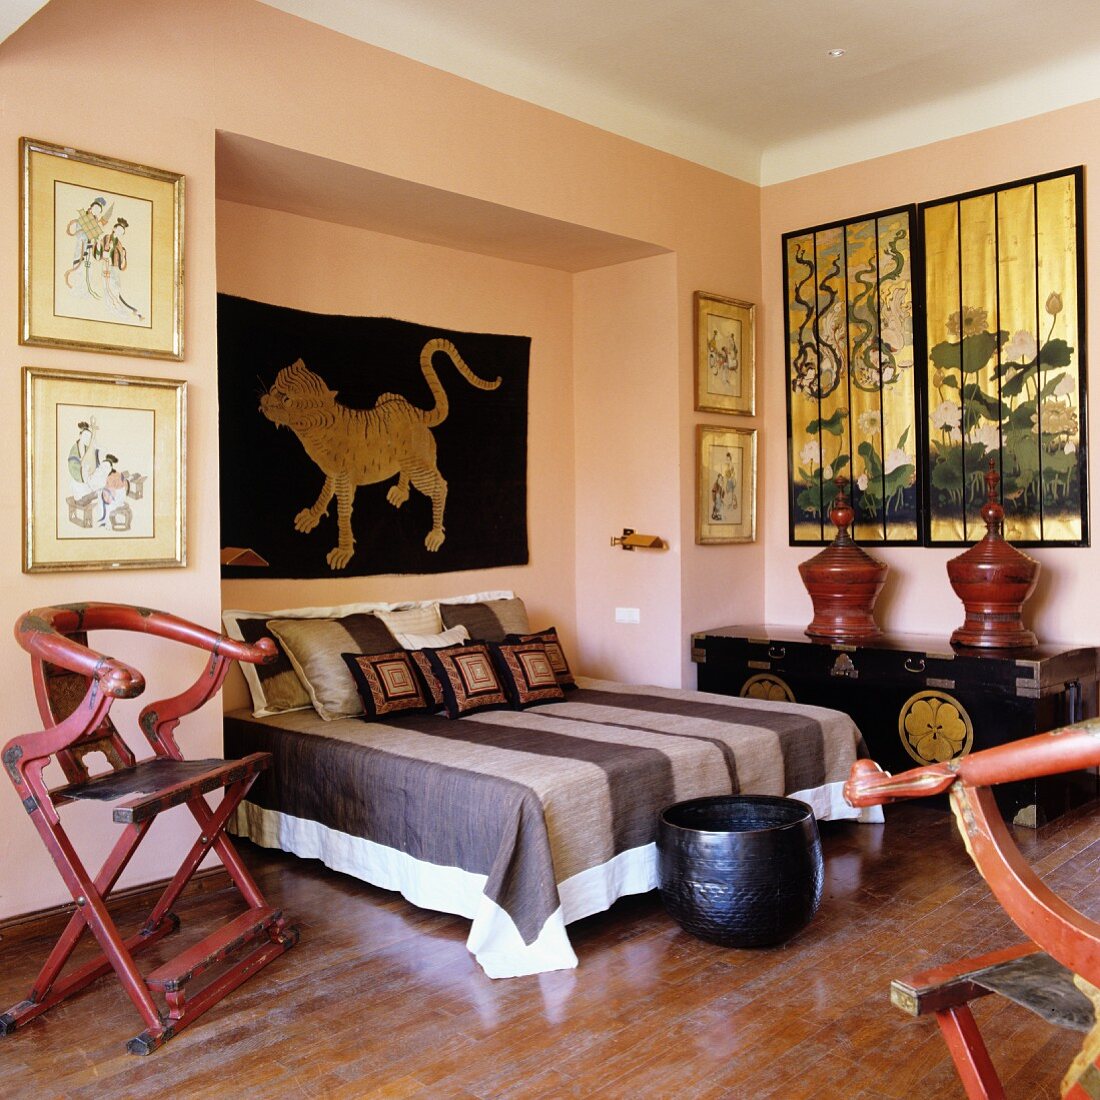 Bedroom in mixture of ethnic styles with antique, Oriental collectors' items